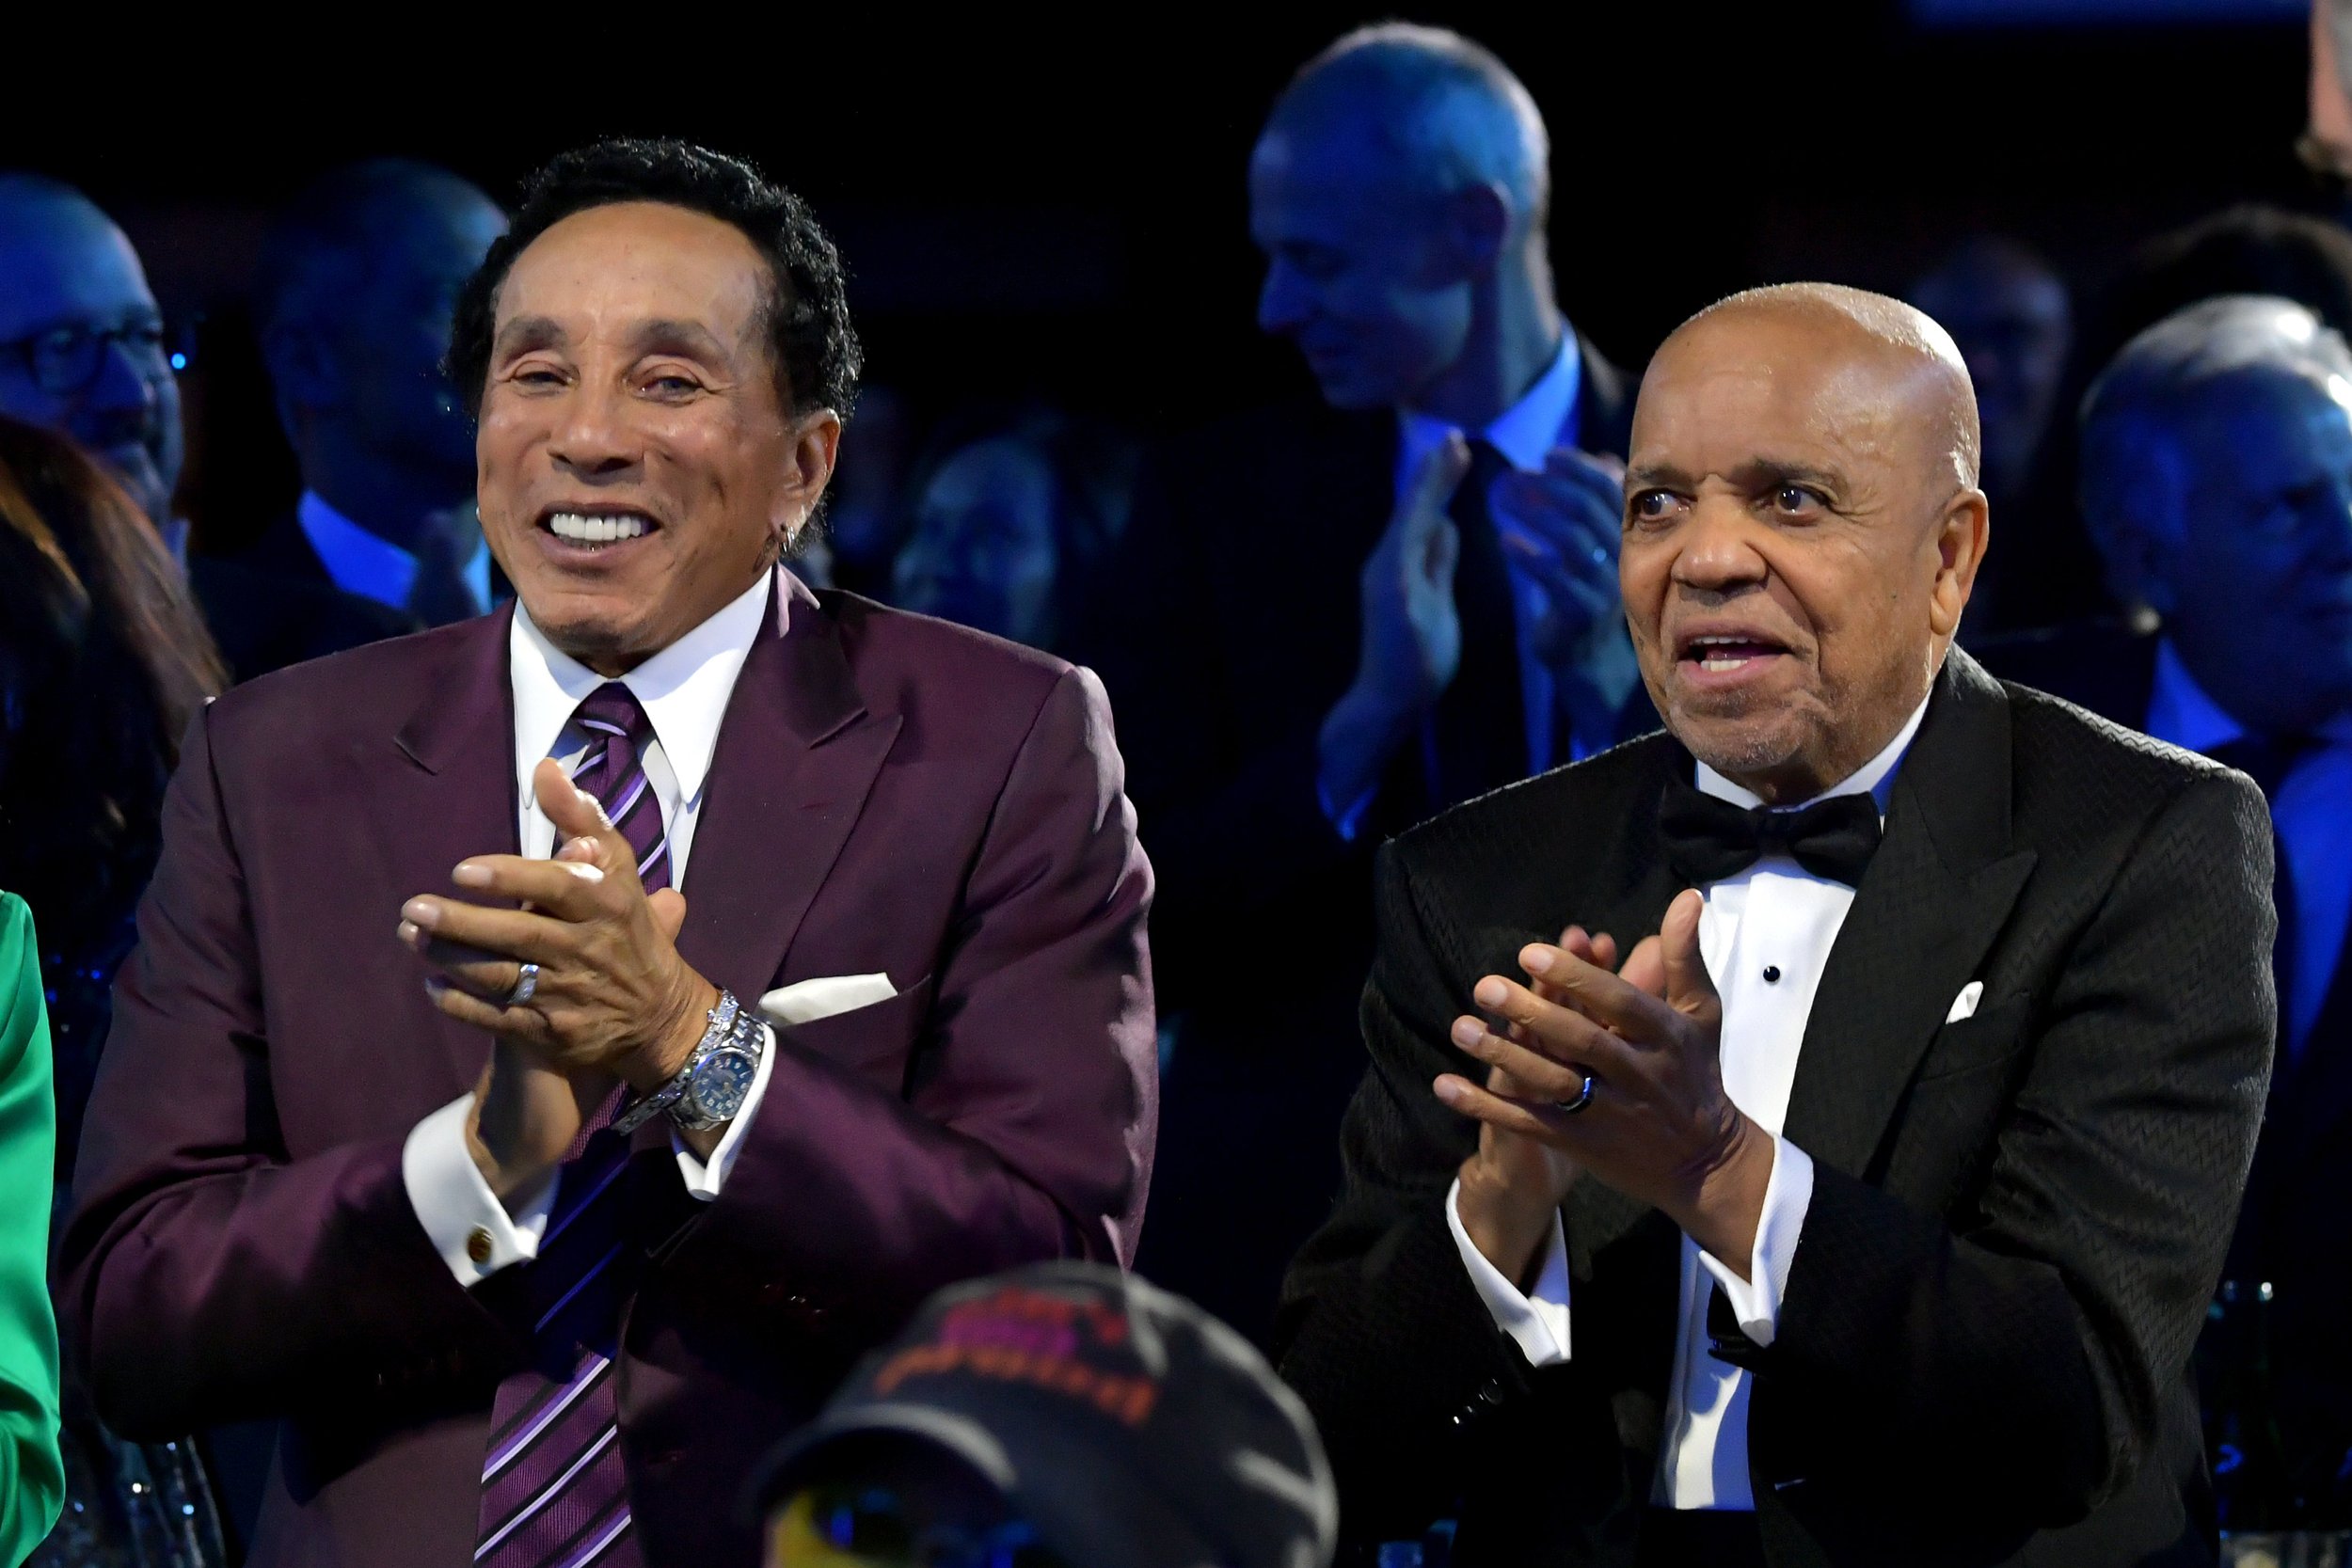  LOS ANGELES, CALIFORNIA - FEBRUARY 03: (L-R) Honorees Smokey Robinson and Berry Gordy attend MusiCares Persons of the Year Honoring Berry Gordy and Smokey Robinson at Los Angeles Convention Center on February 03, 2023 in Los Angeles, California. (Ph